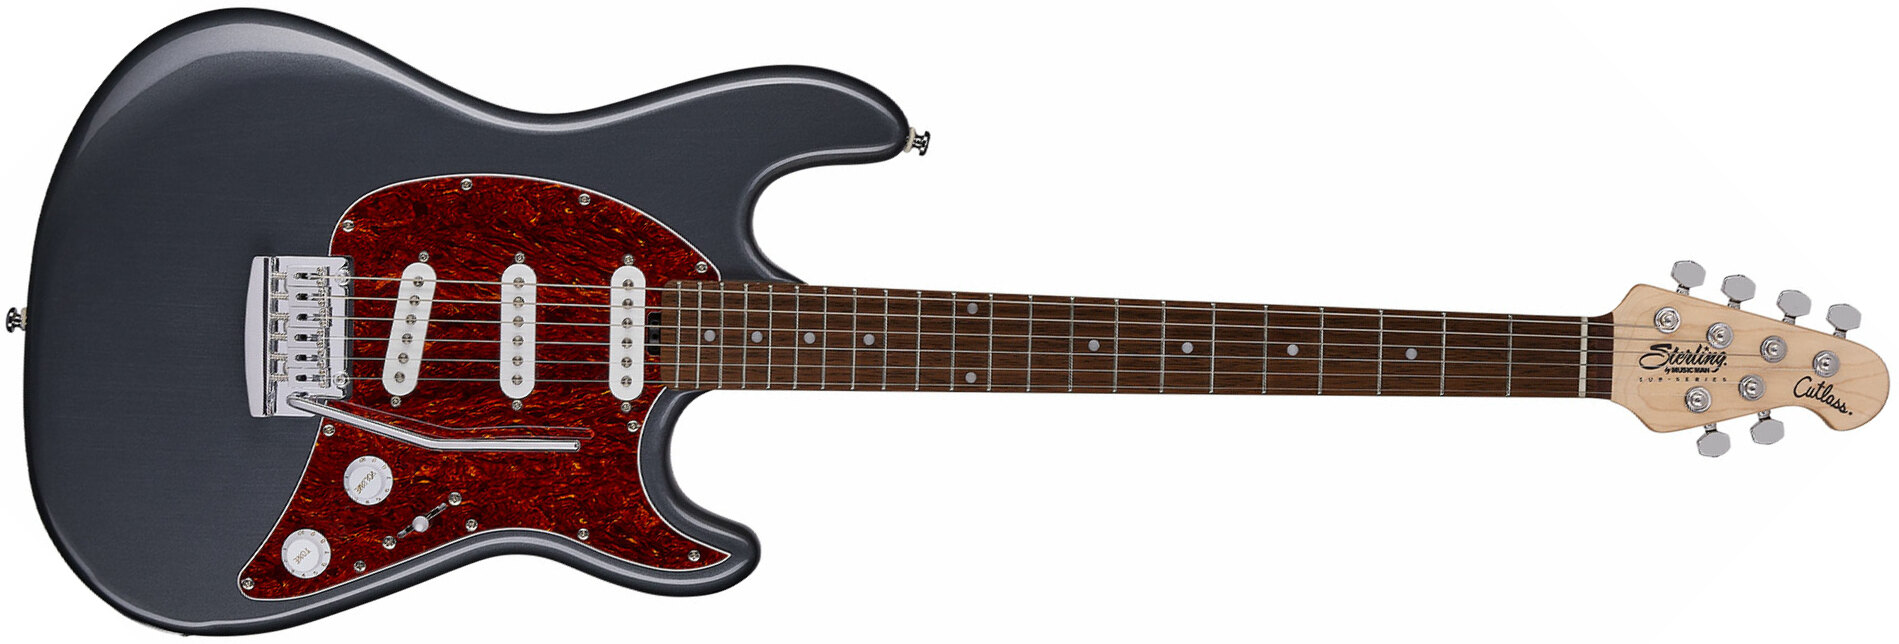 Sterling By Musicman Cutlass Ct30sss 3s Trem Rw - Charcoal Frost - E-Gitarre in Str-Form - Main picture